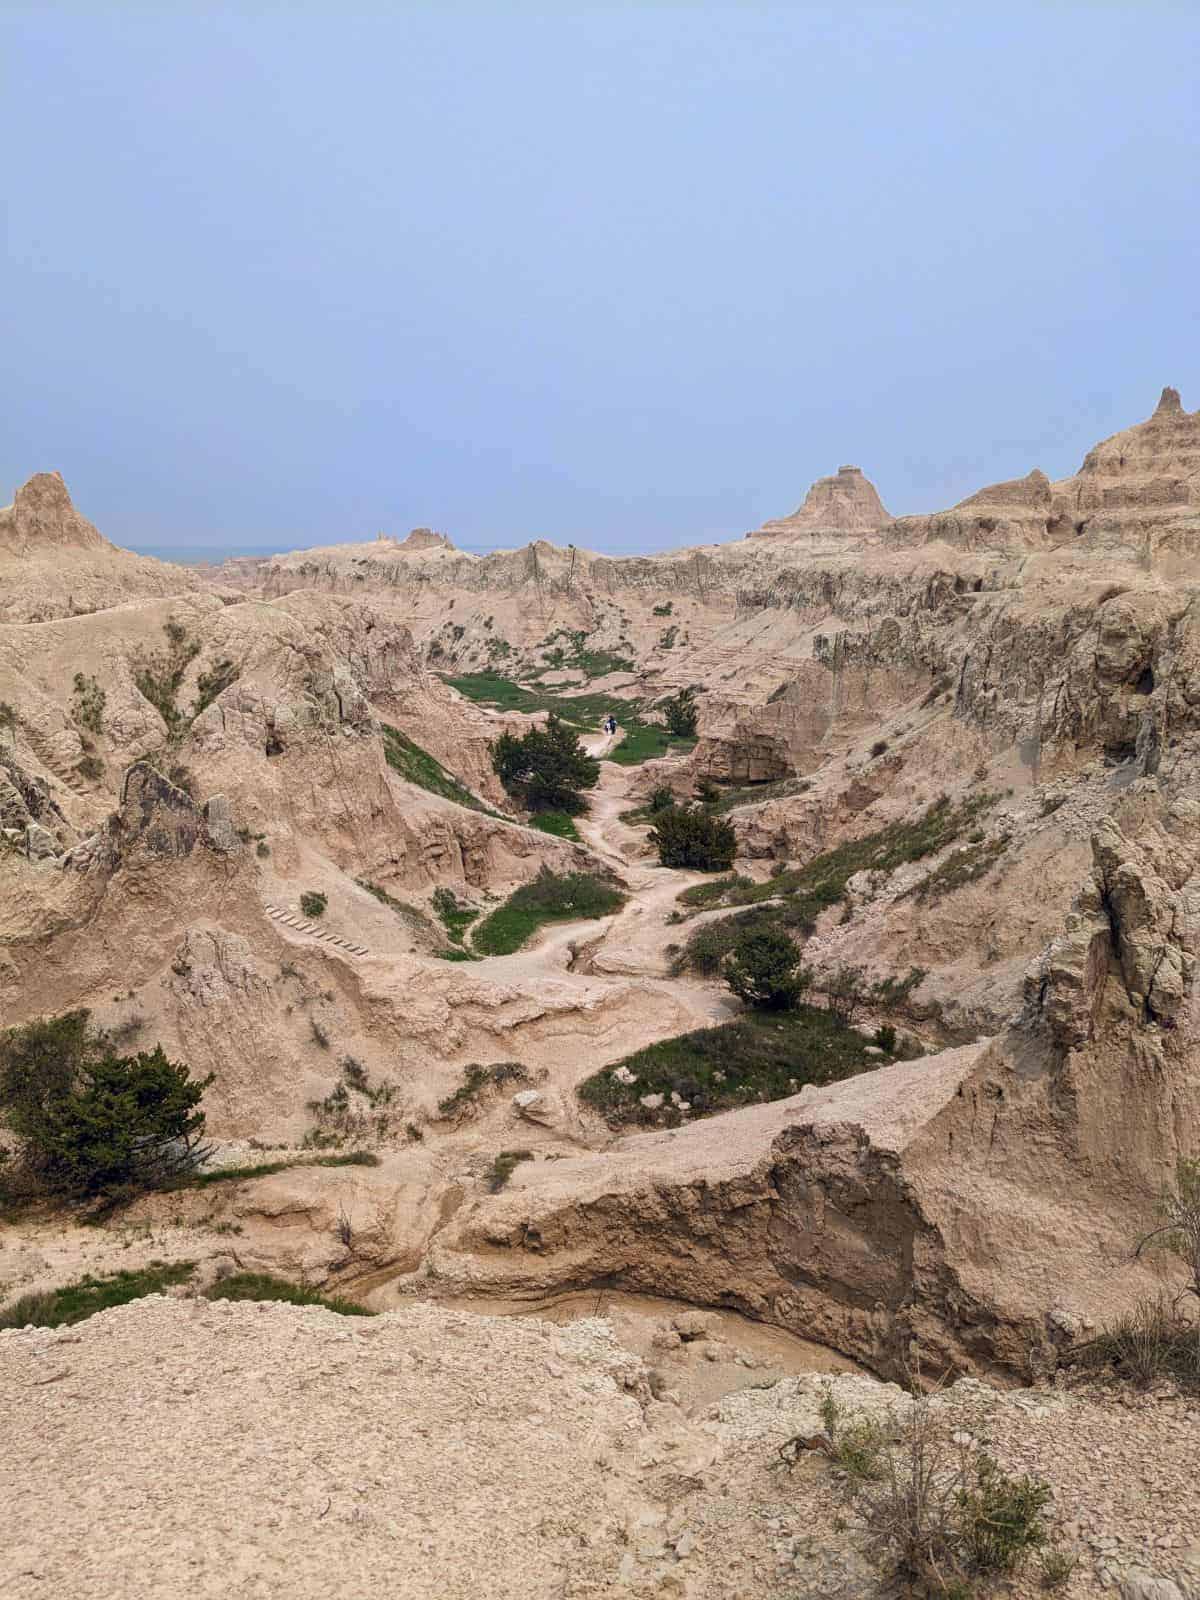 View of lower Notch hike area and ladder from the hike cliff path in Badlands National park